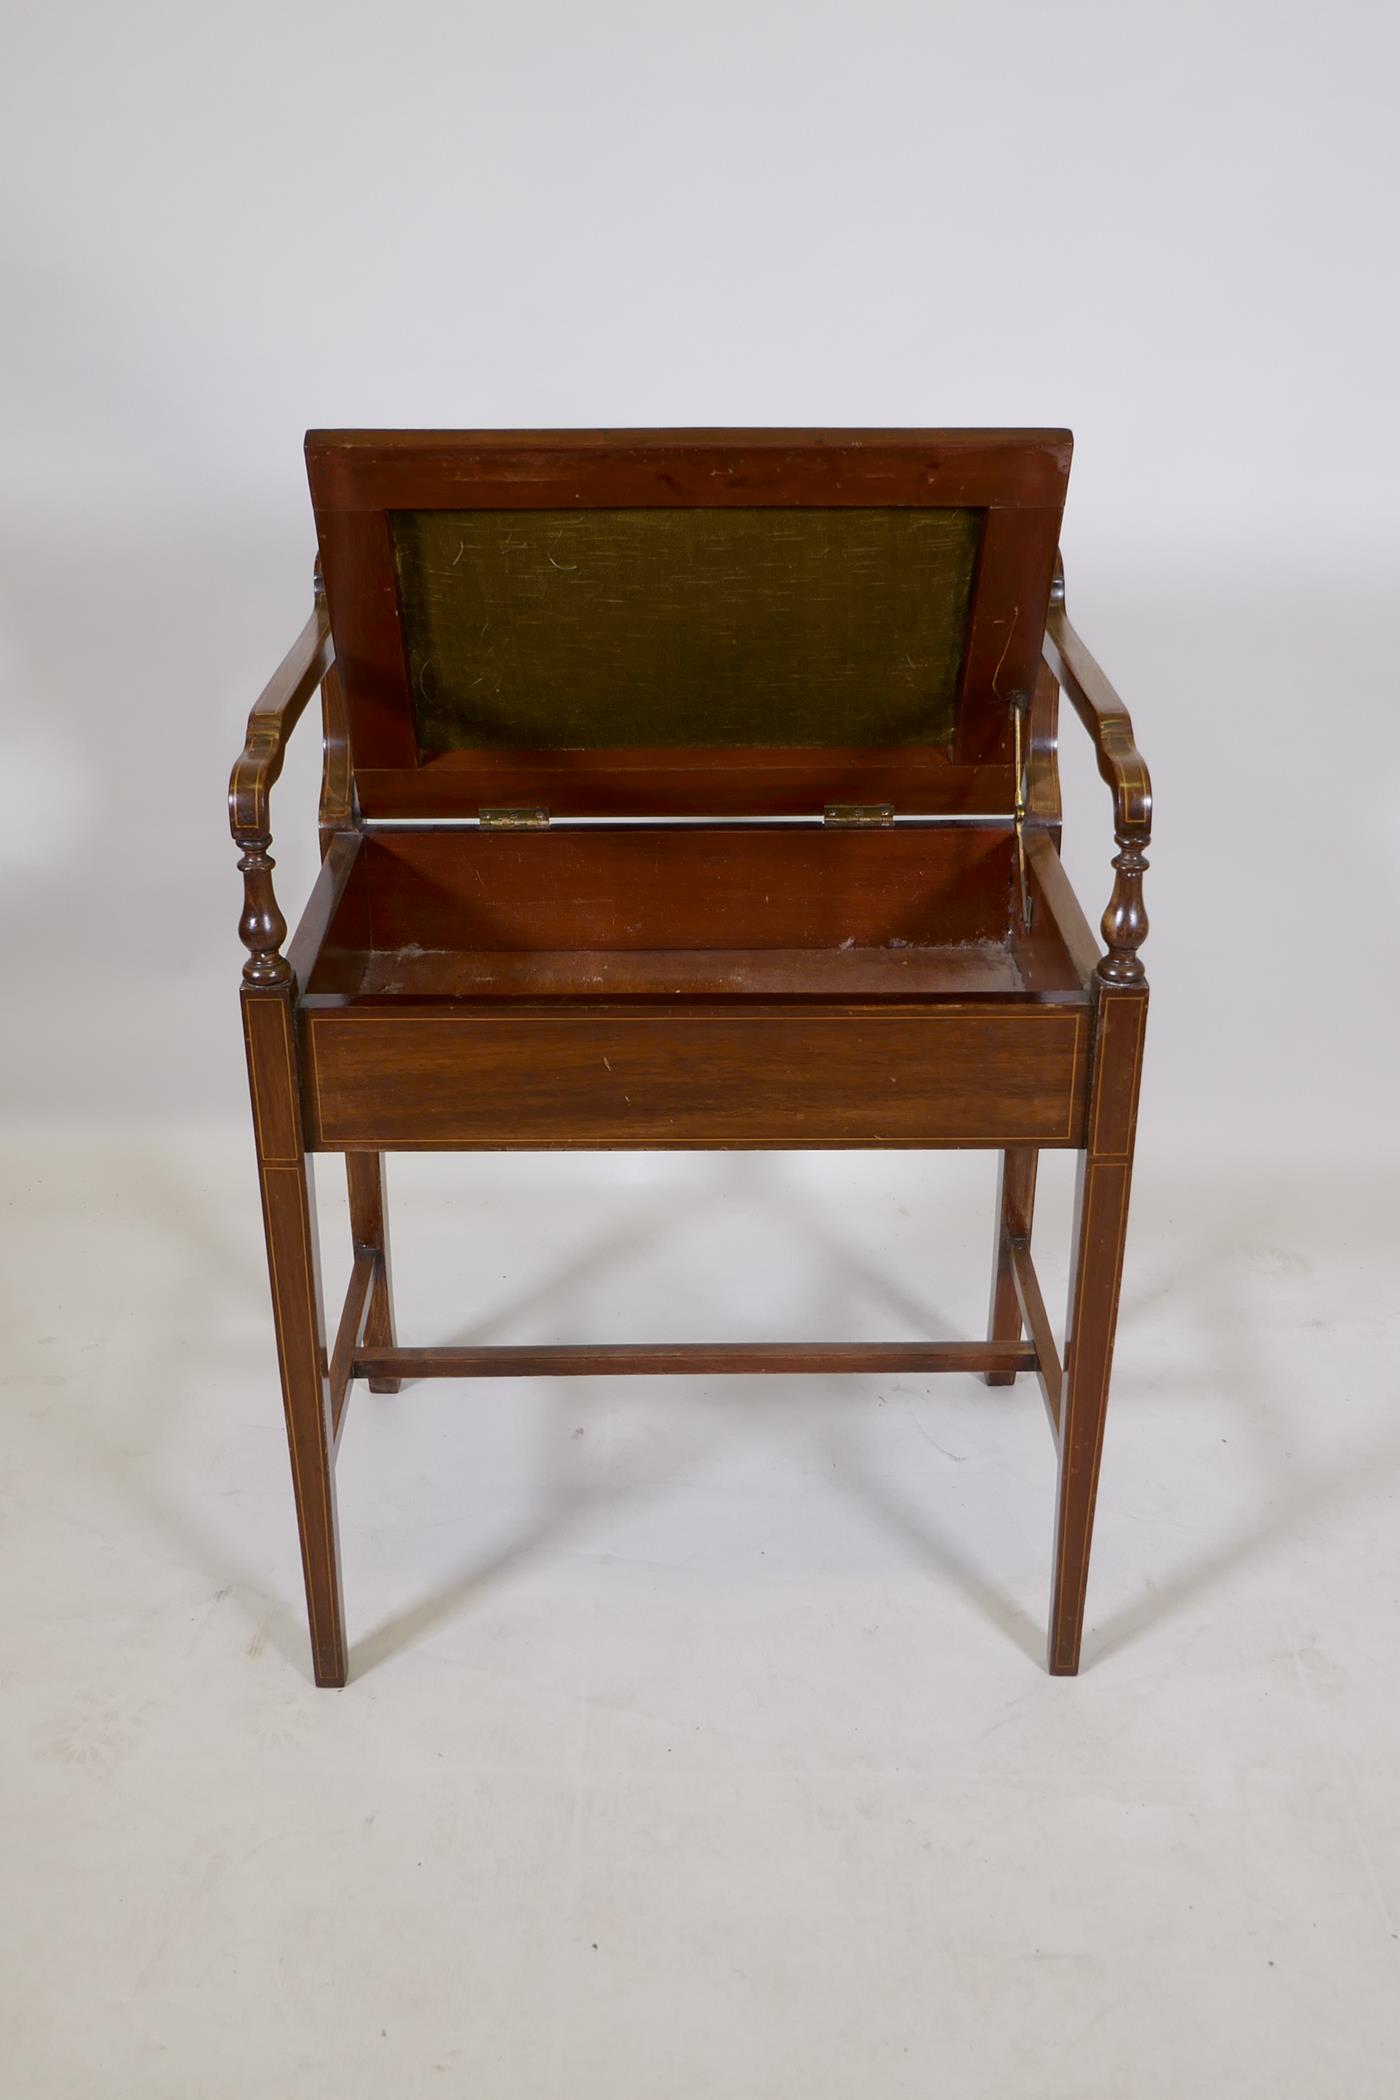 An Edwardian mahogany piano stool with boxwood and burr walnut inlaid decoration and lift up seat, - Image 4 of 4